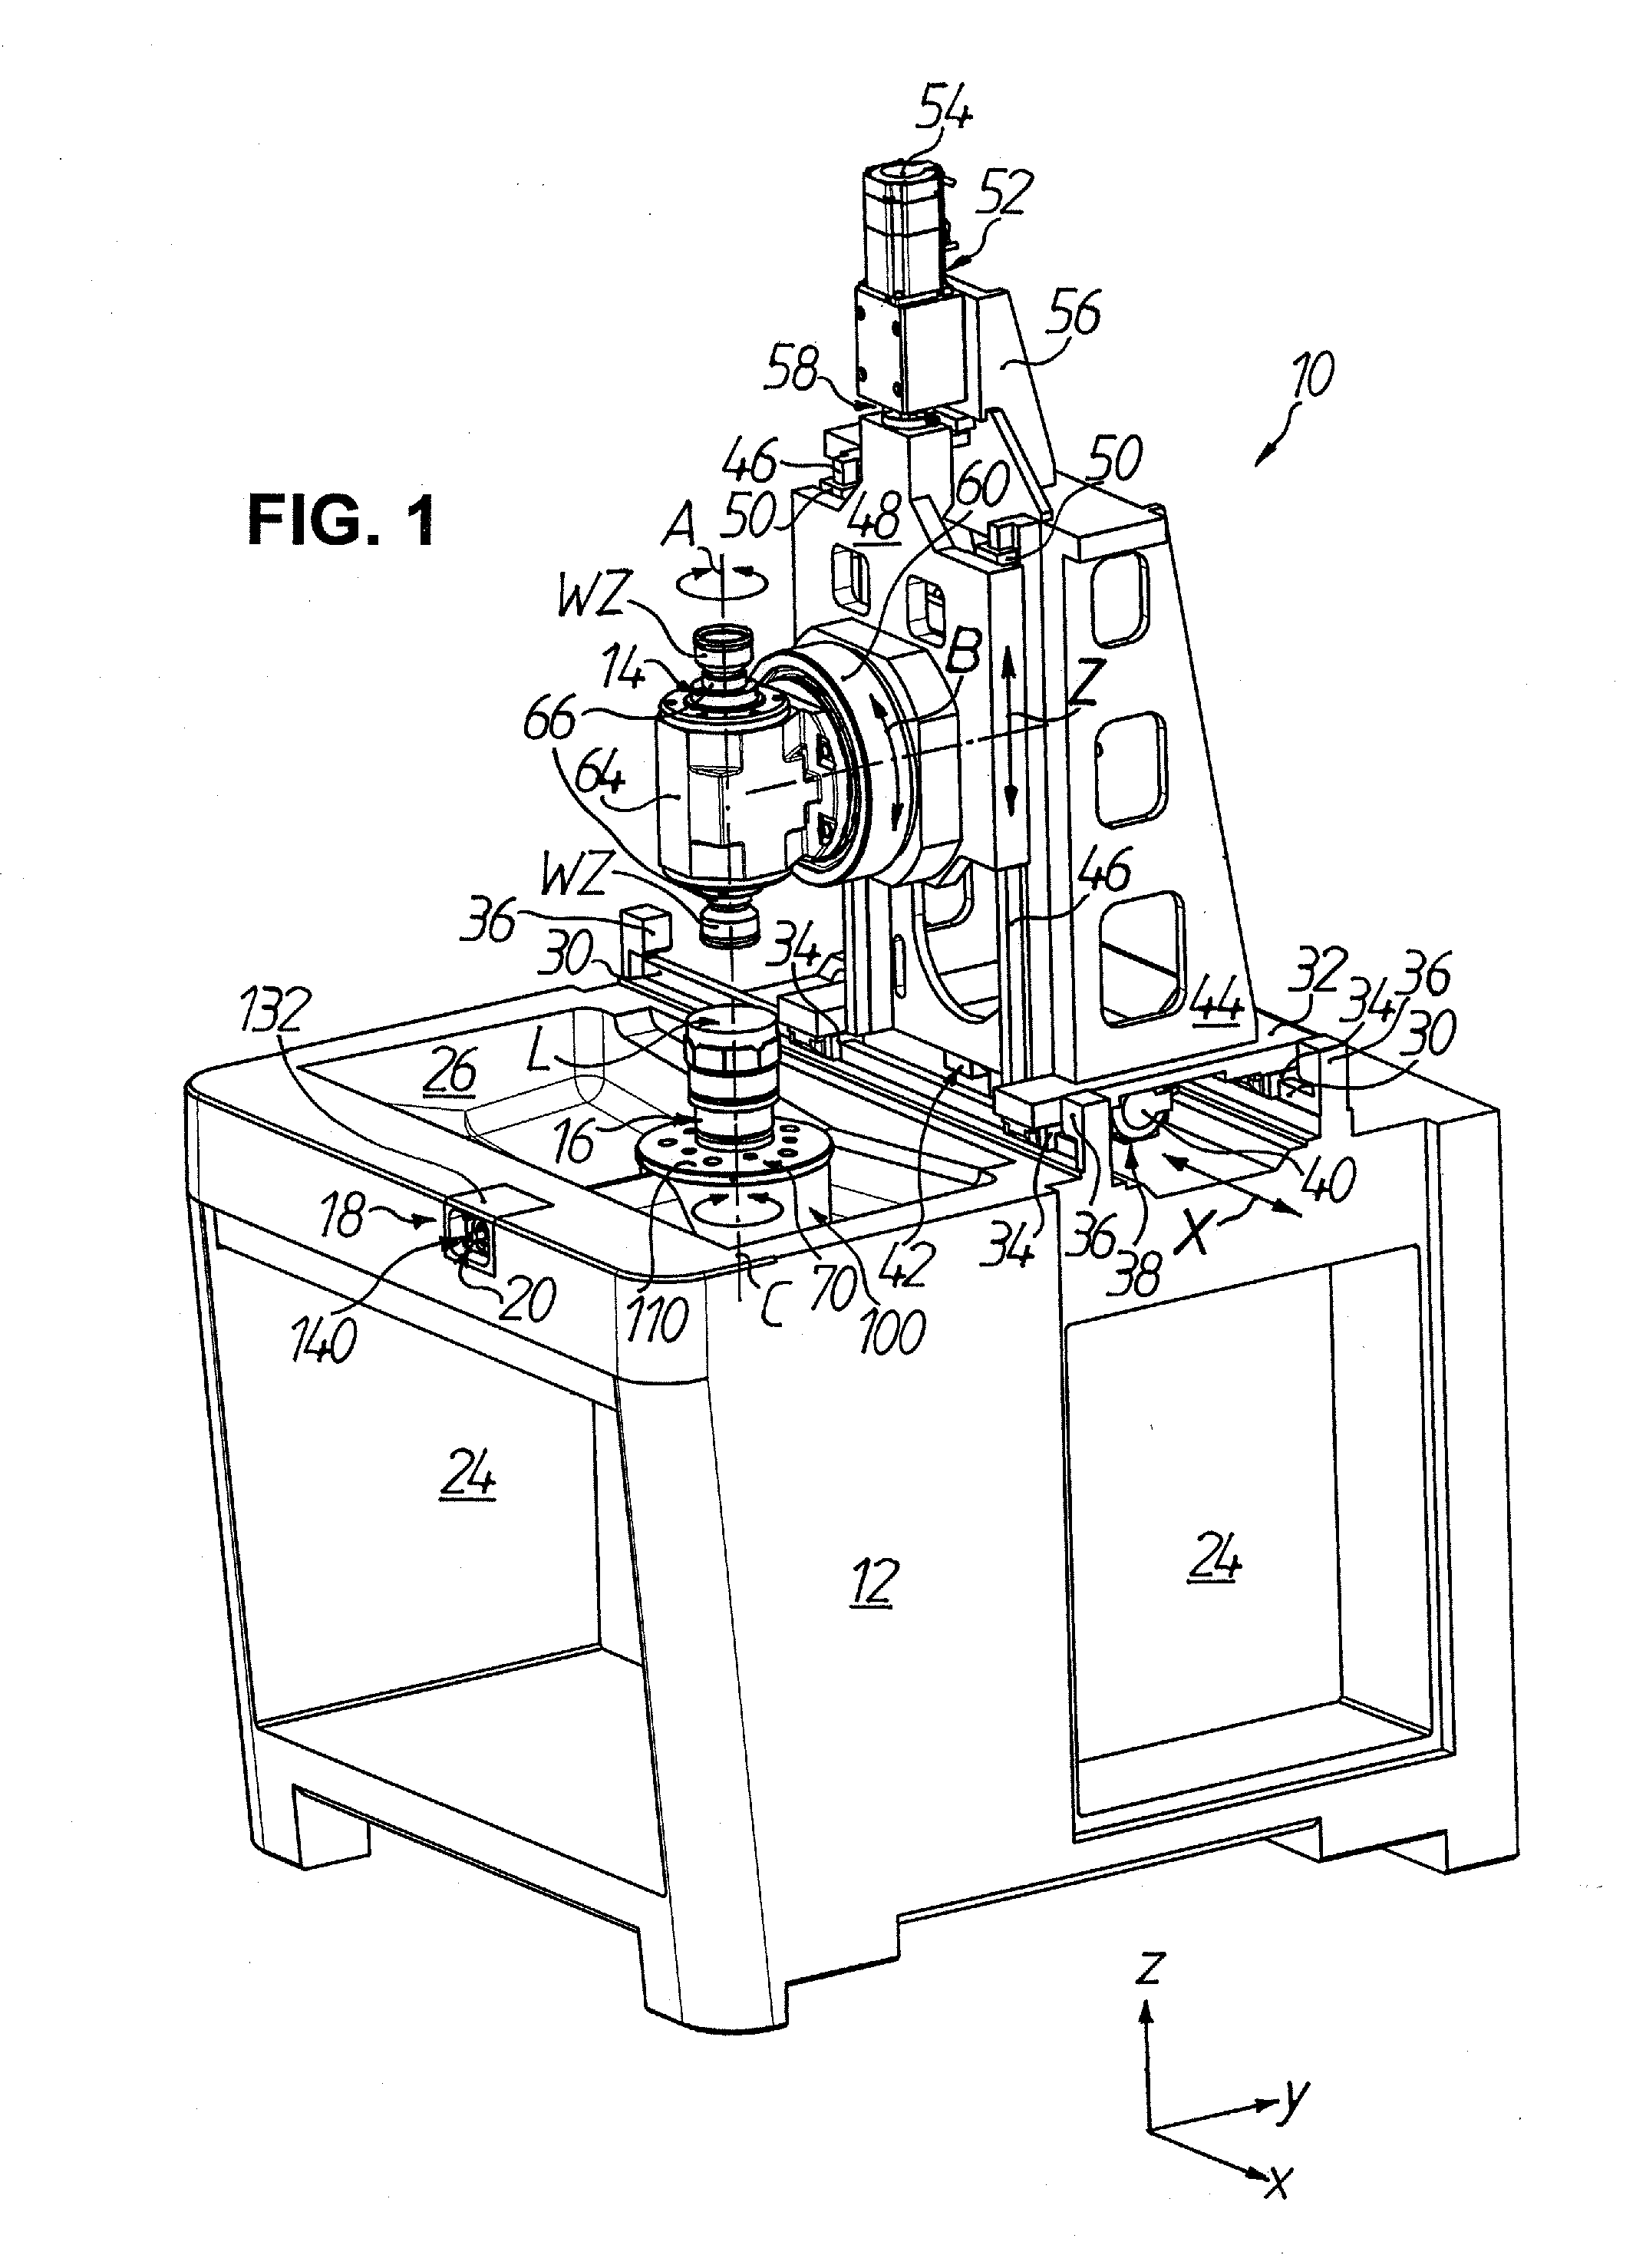 Device for Grinding, Precision-Grinding and/or Polishing of Workpieces in Optical Quality, Particularly of Spherical Lens Surfaces in Precision Optics